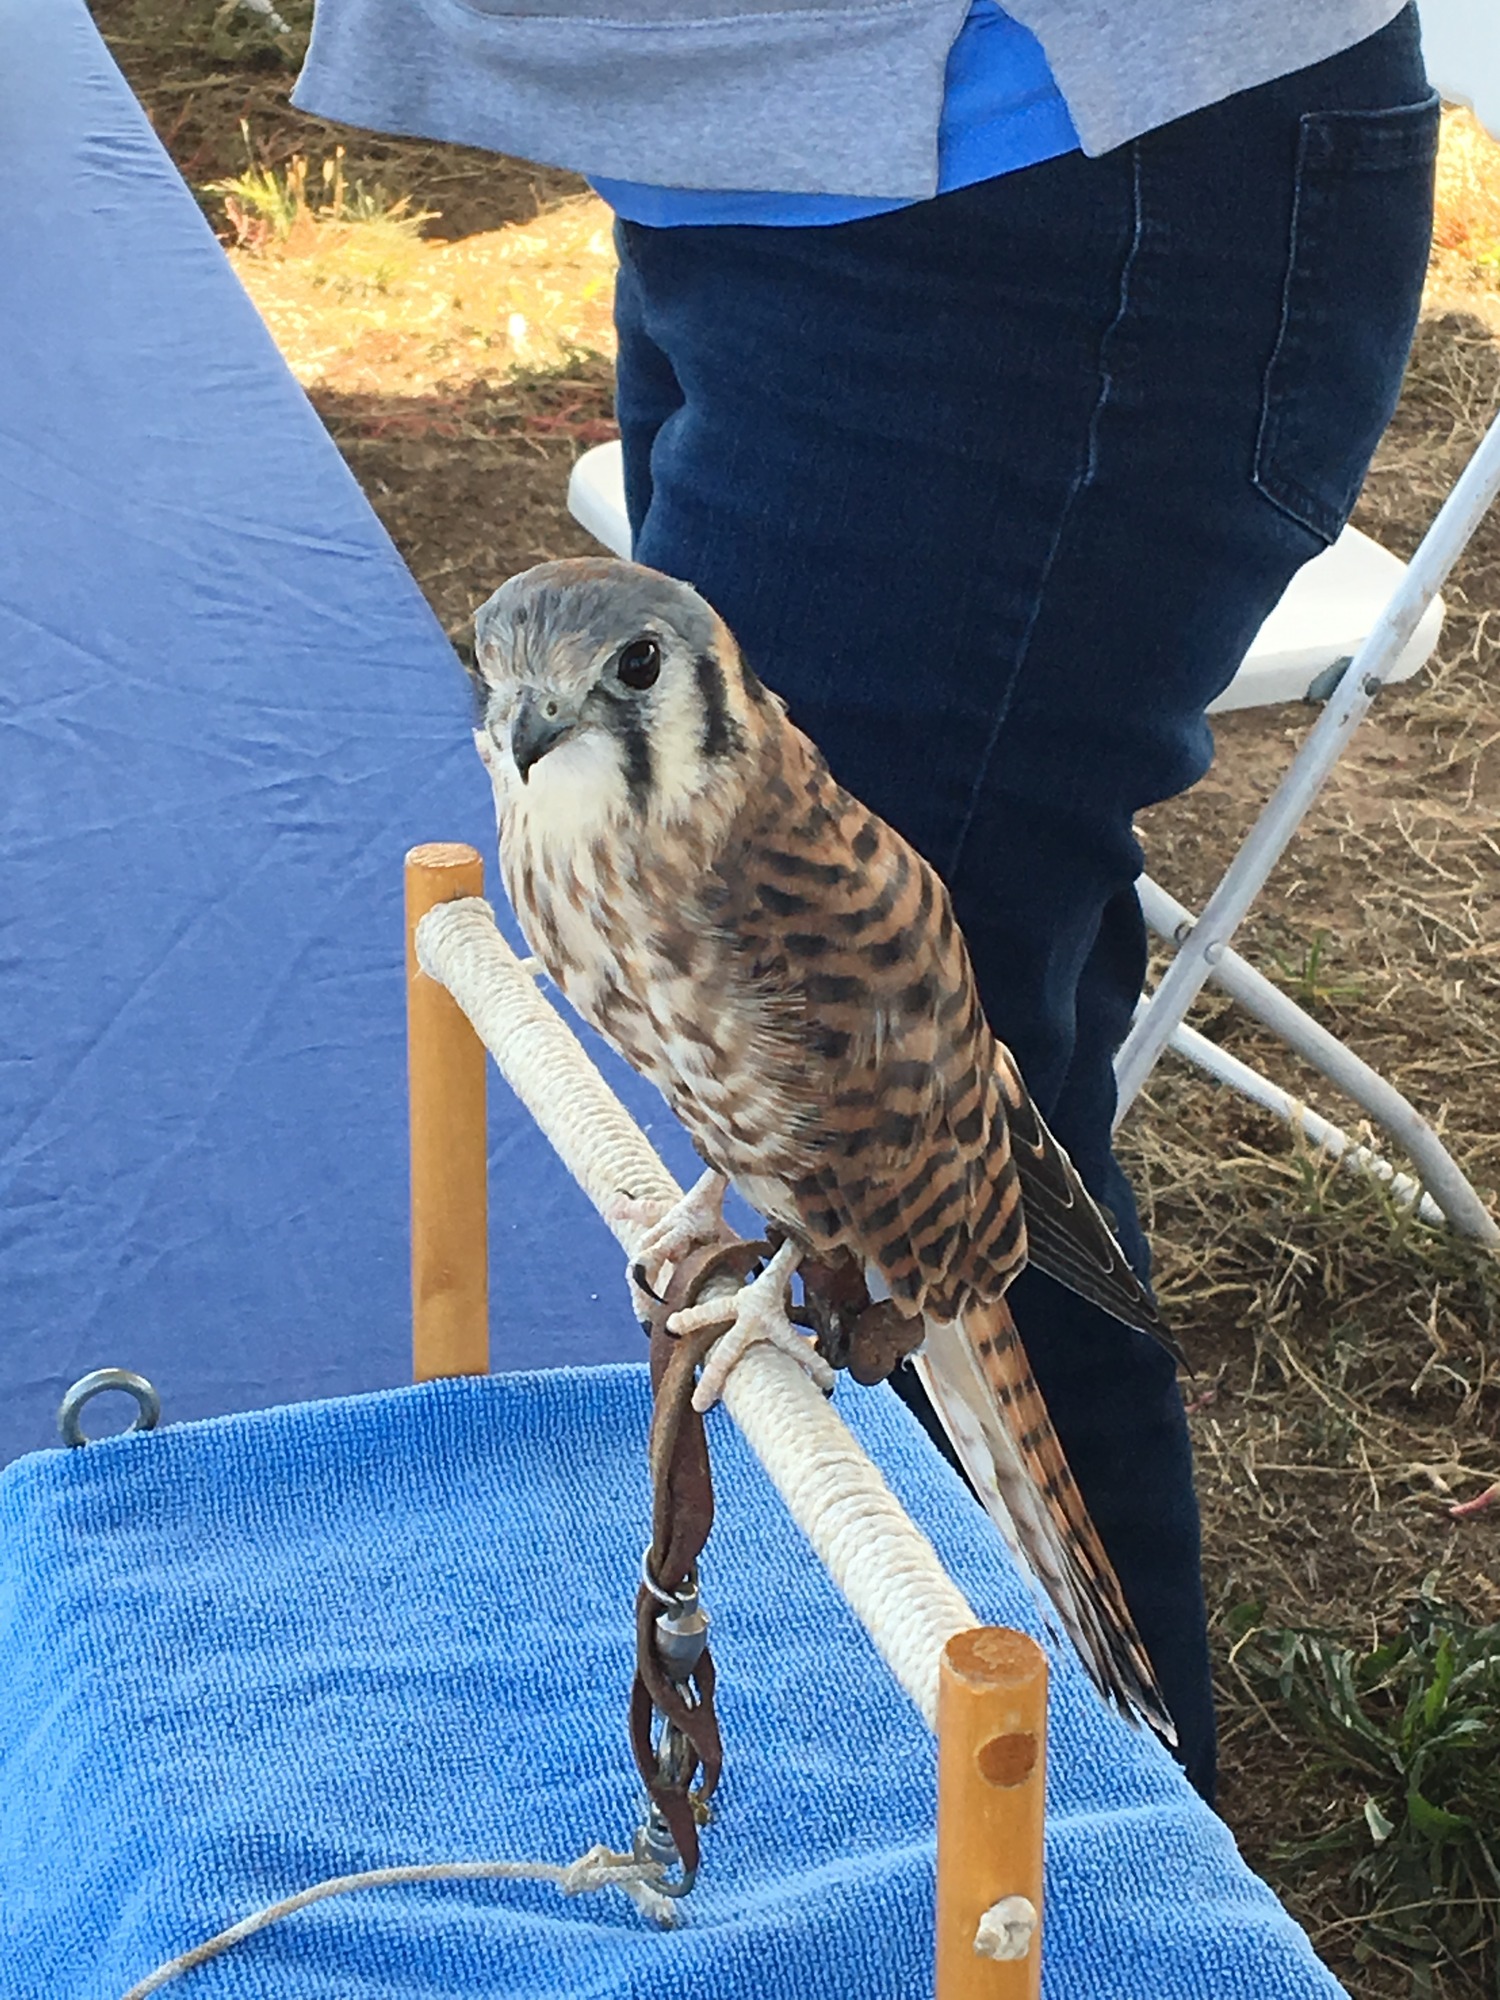 A kestral was rescued at the Valle de Oro Trail in Albuquerque, NM